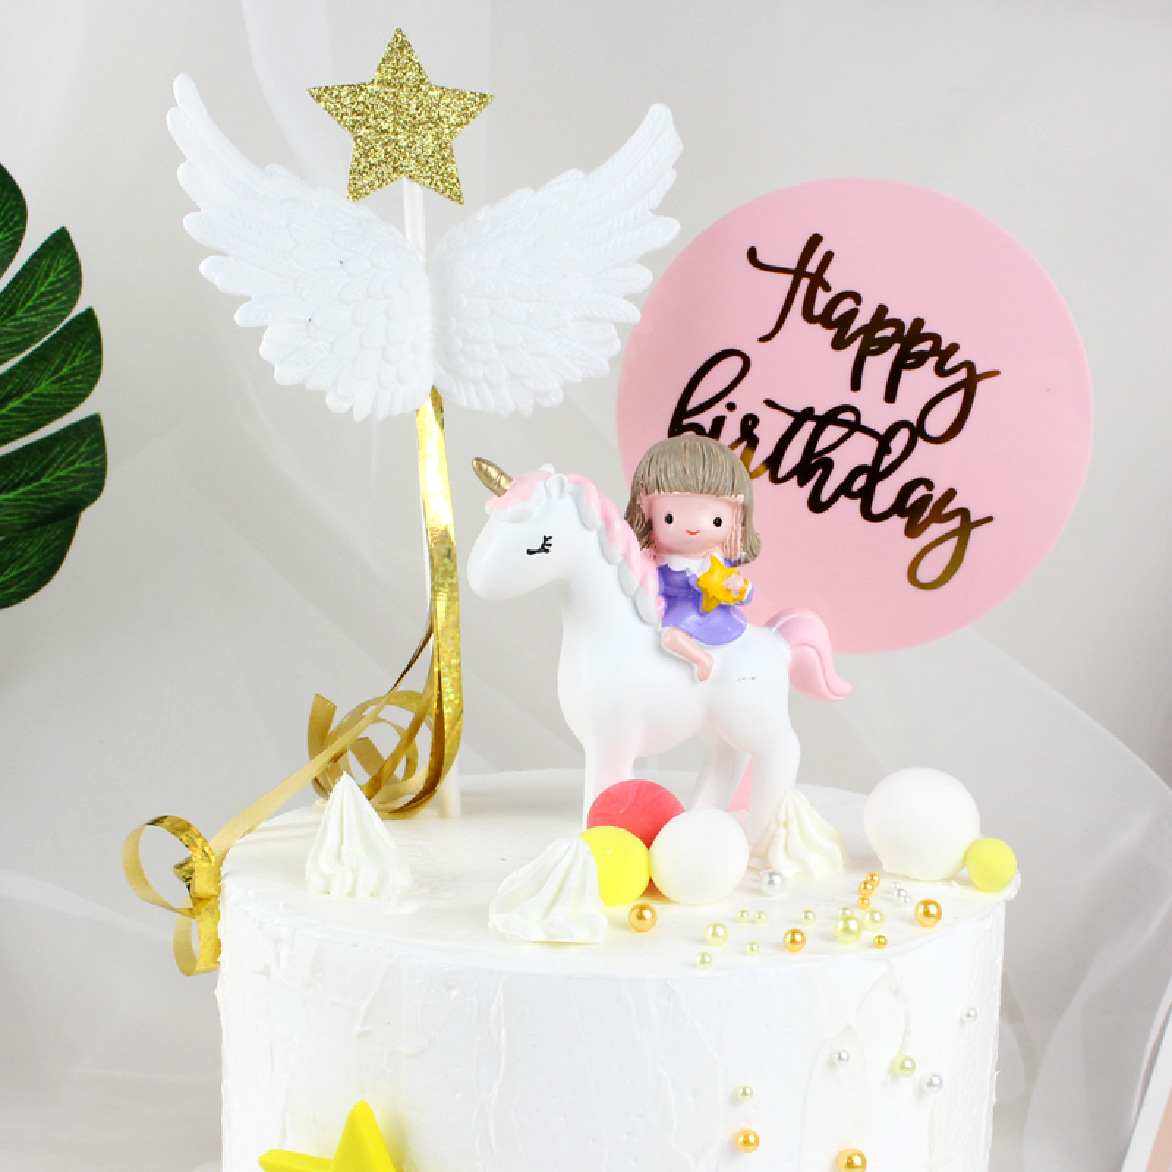 Cake Topper, Cupcake Decorations - Angel Wings with Gold Star